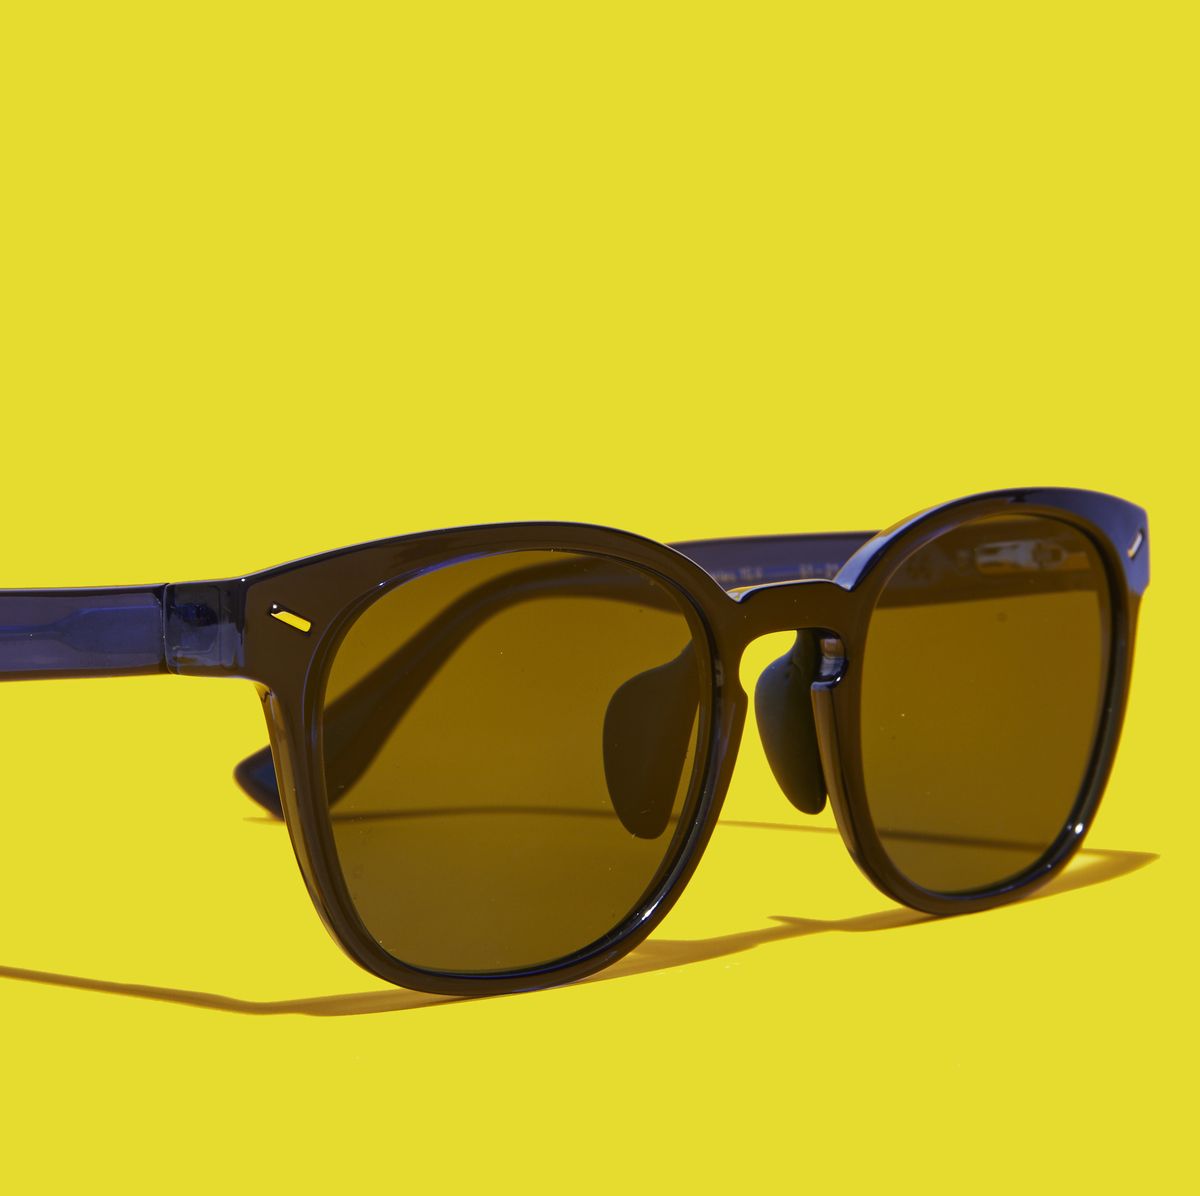 Article One x Tracksmith The Charles Sunglasses Review